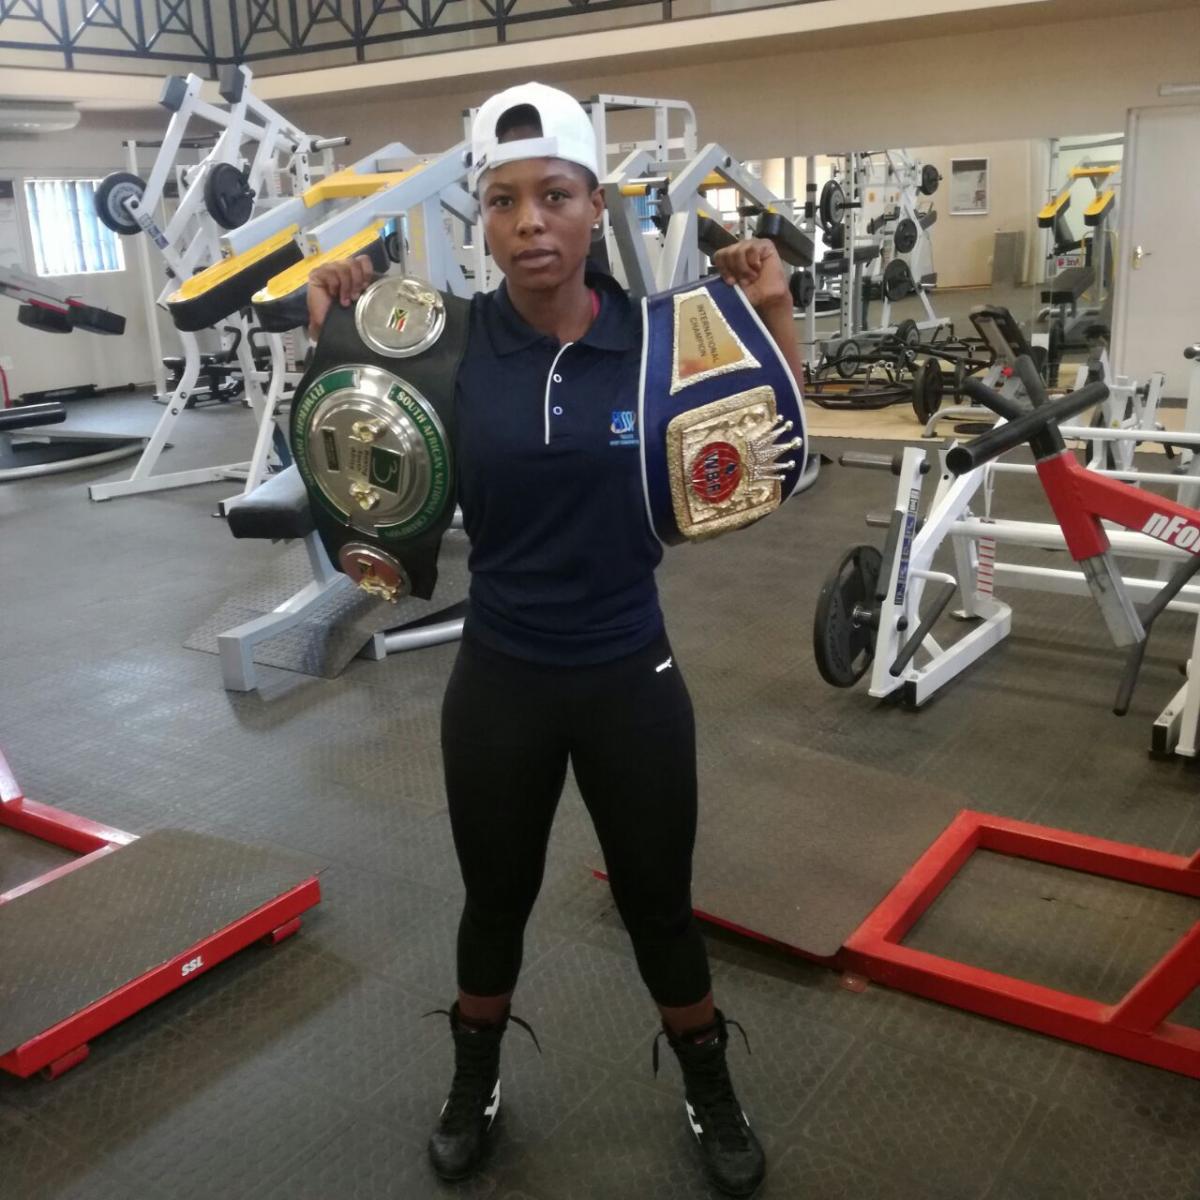 Matshidiso Mokebisi, also known as the ‘Scorpion Queen’, says more must be done to promote women’s boxing.